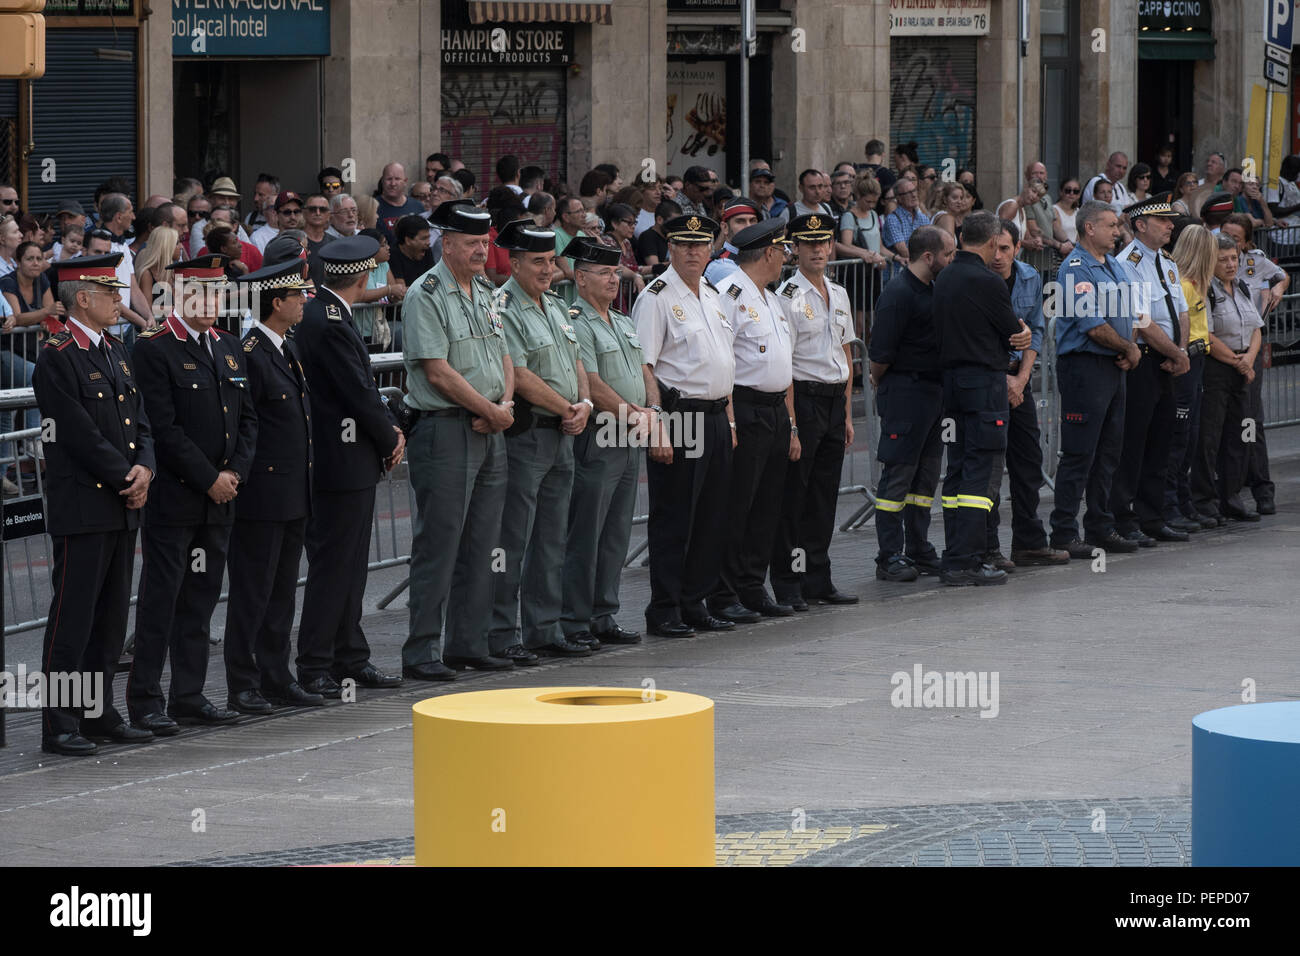 Barcelona, Spain. 17th Aug 2018. August 17, 2018 - Barcelona, Catalonia, Spain -  Members of the police and emergency forces during the  tribute in Las Ramblas of Barcelona  for the victims of last year's terror attacks  that  killed  16 people and injured more than 120  when two vehicles crashed into the crowds. Credit:  Jordi Boixareu/Alamy Live News Stock Photo